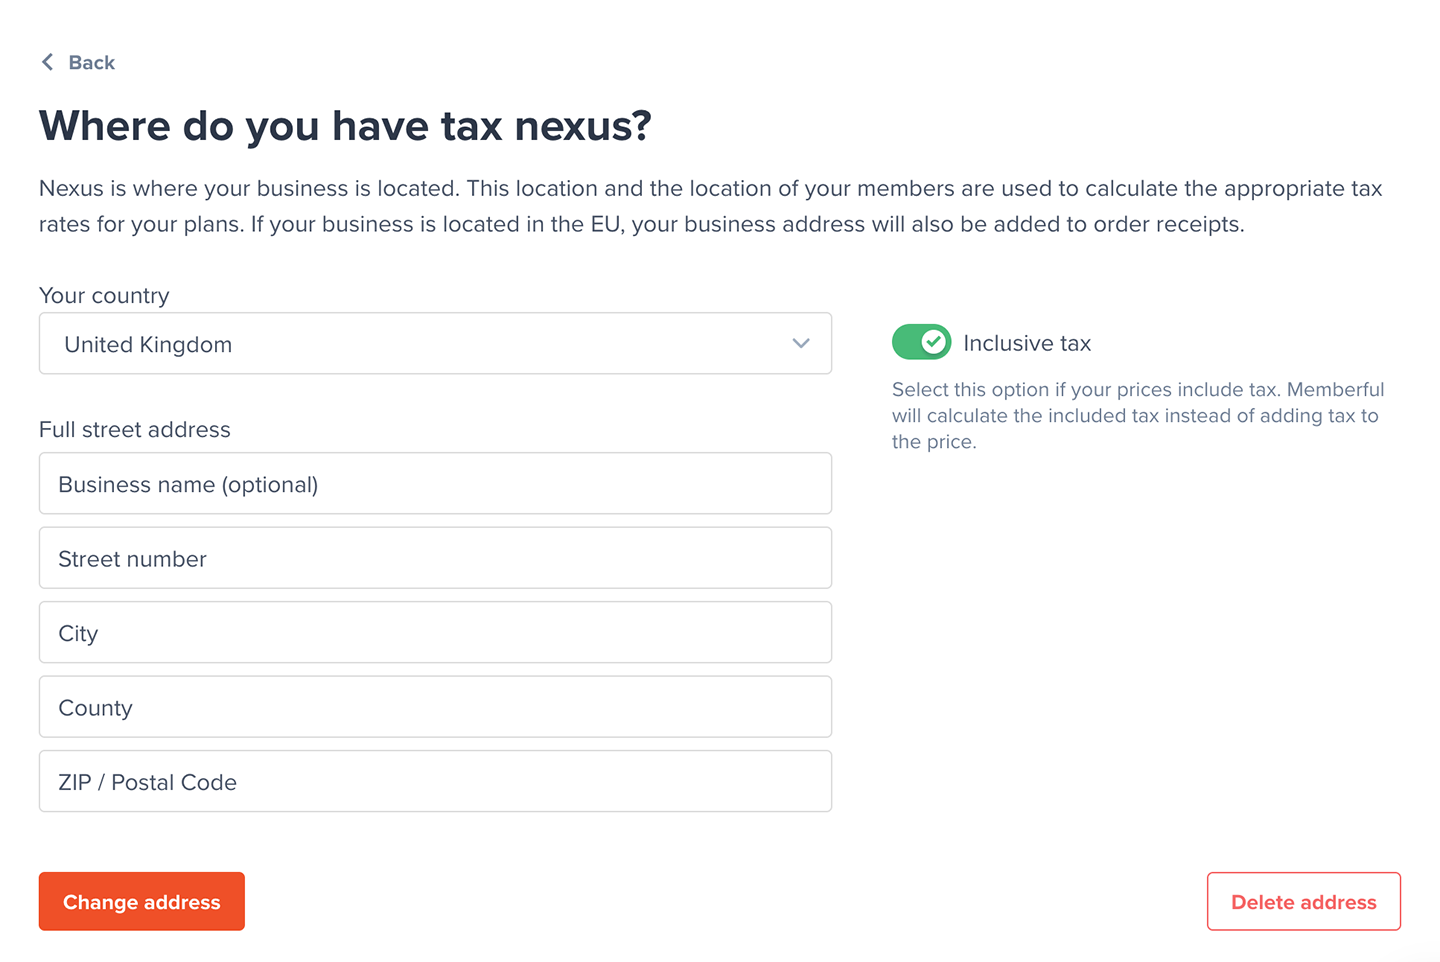 Tax-included setting